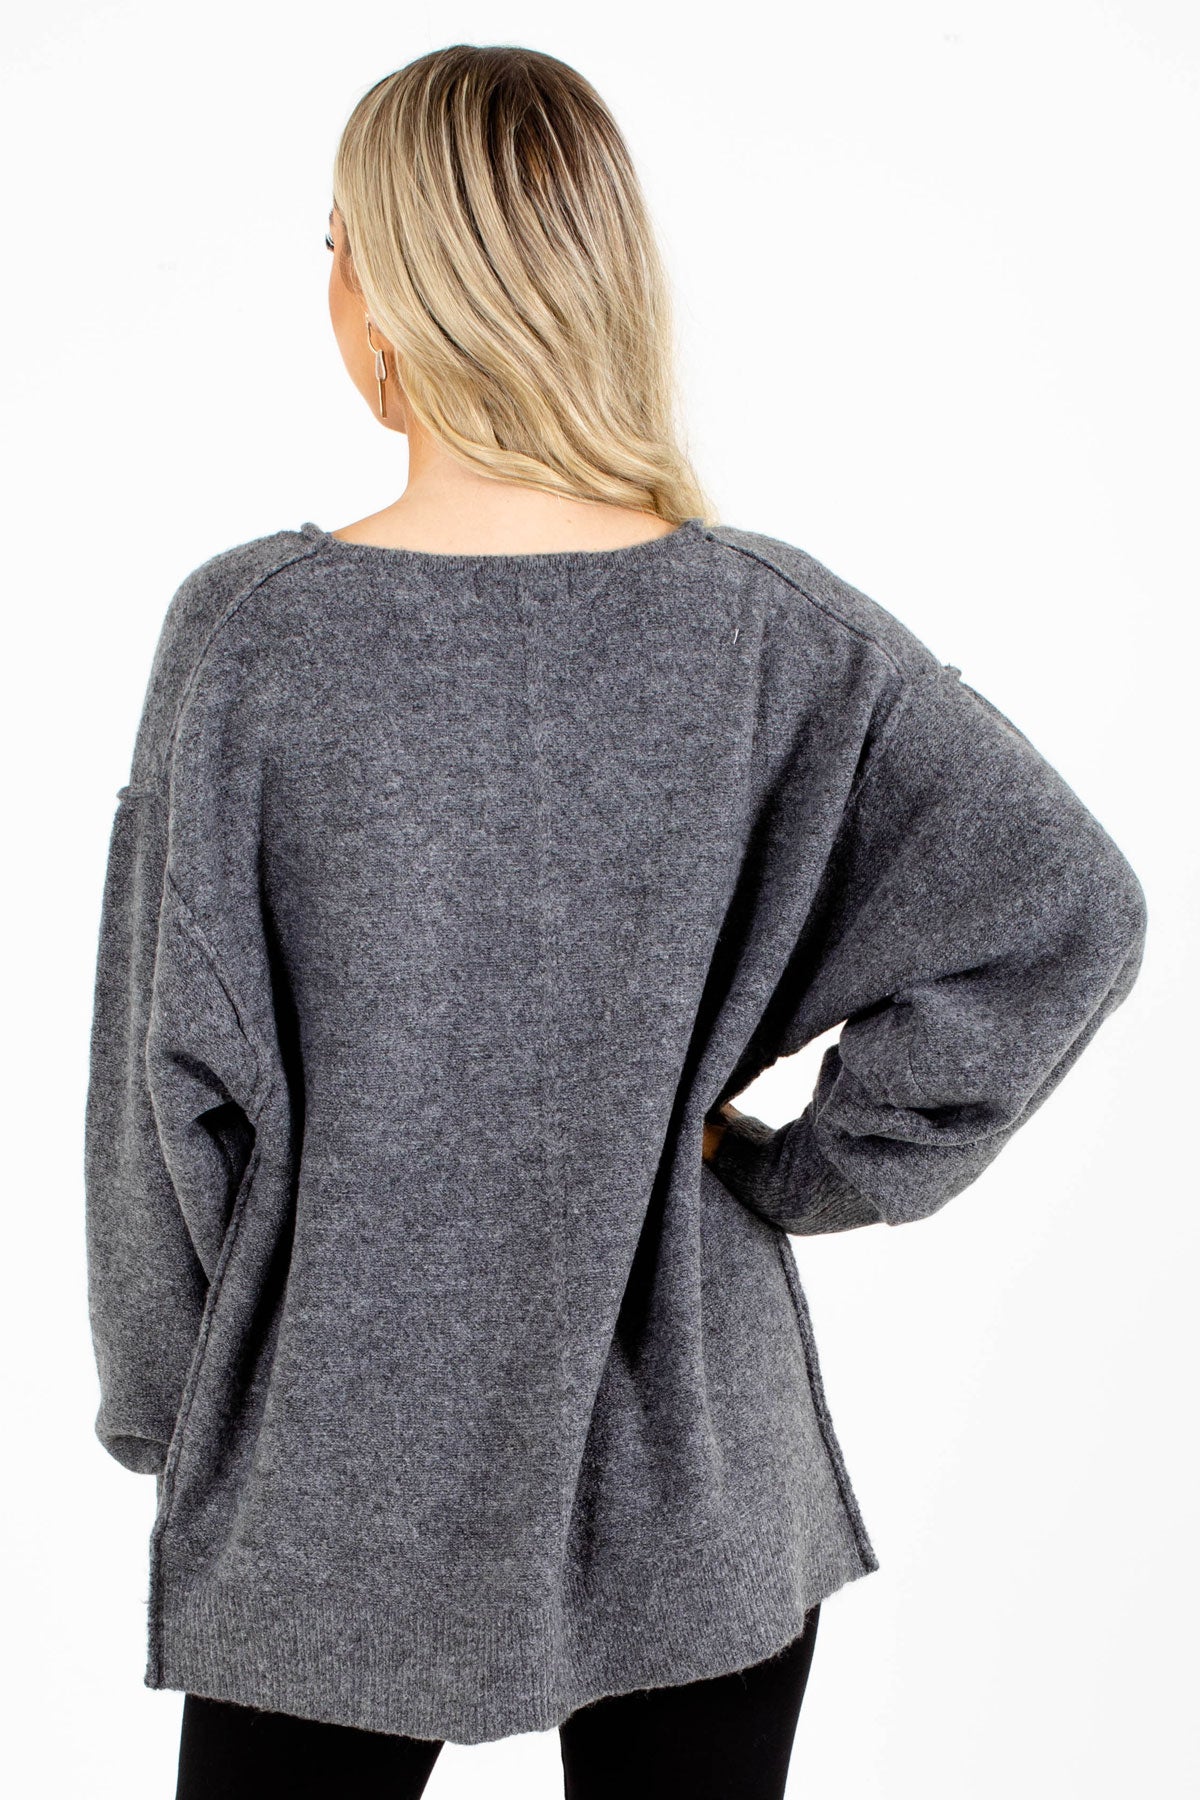 Women's Gray High-Quality Boutique Cardigan